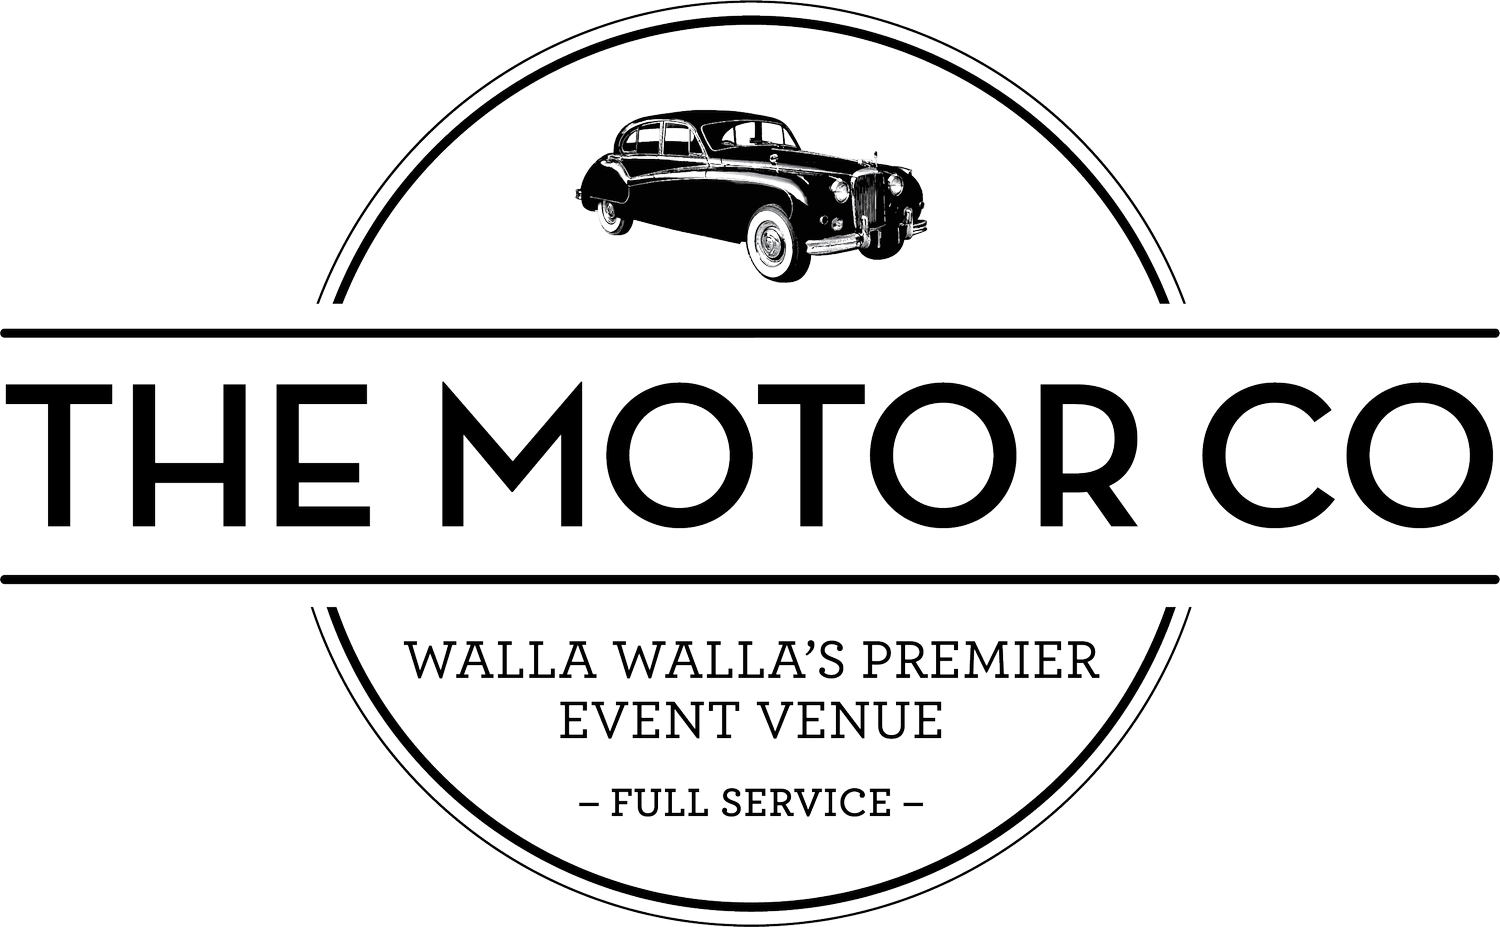 The Motor Co